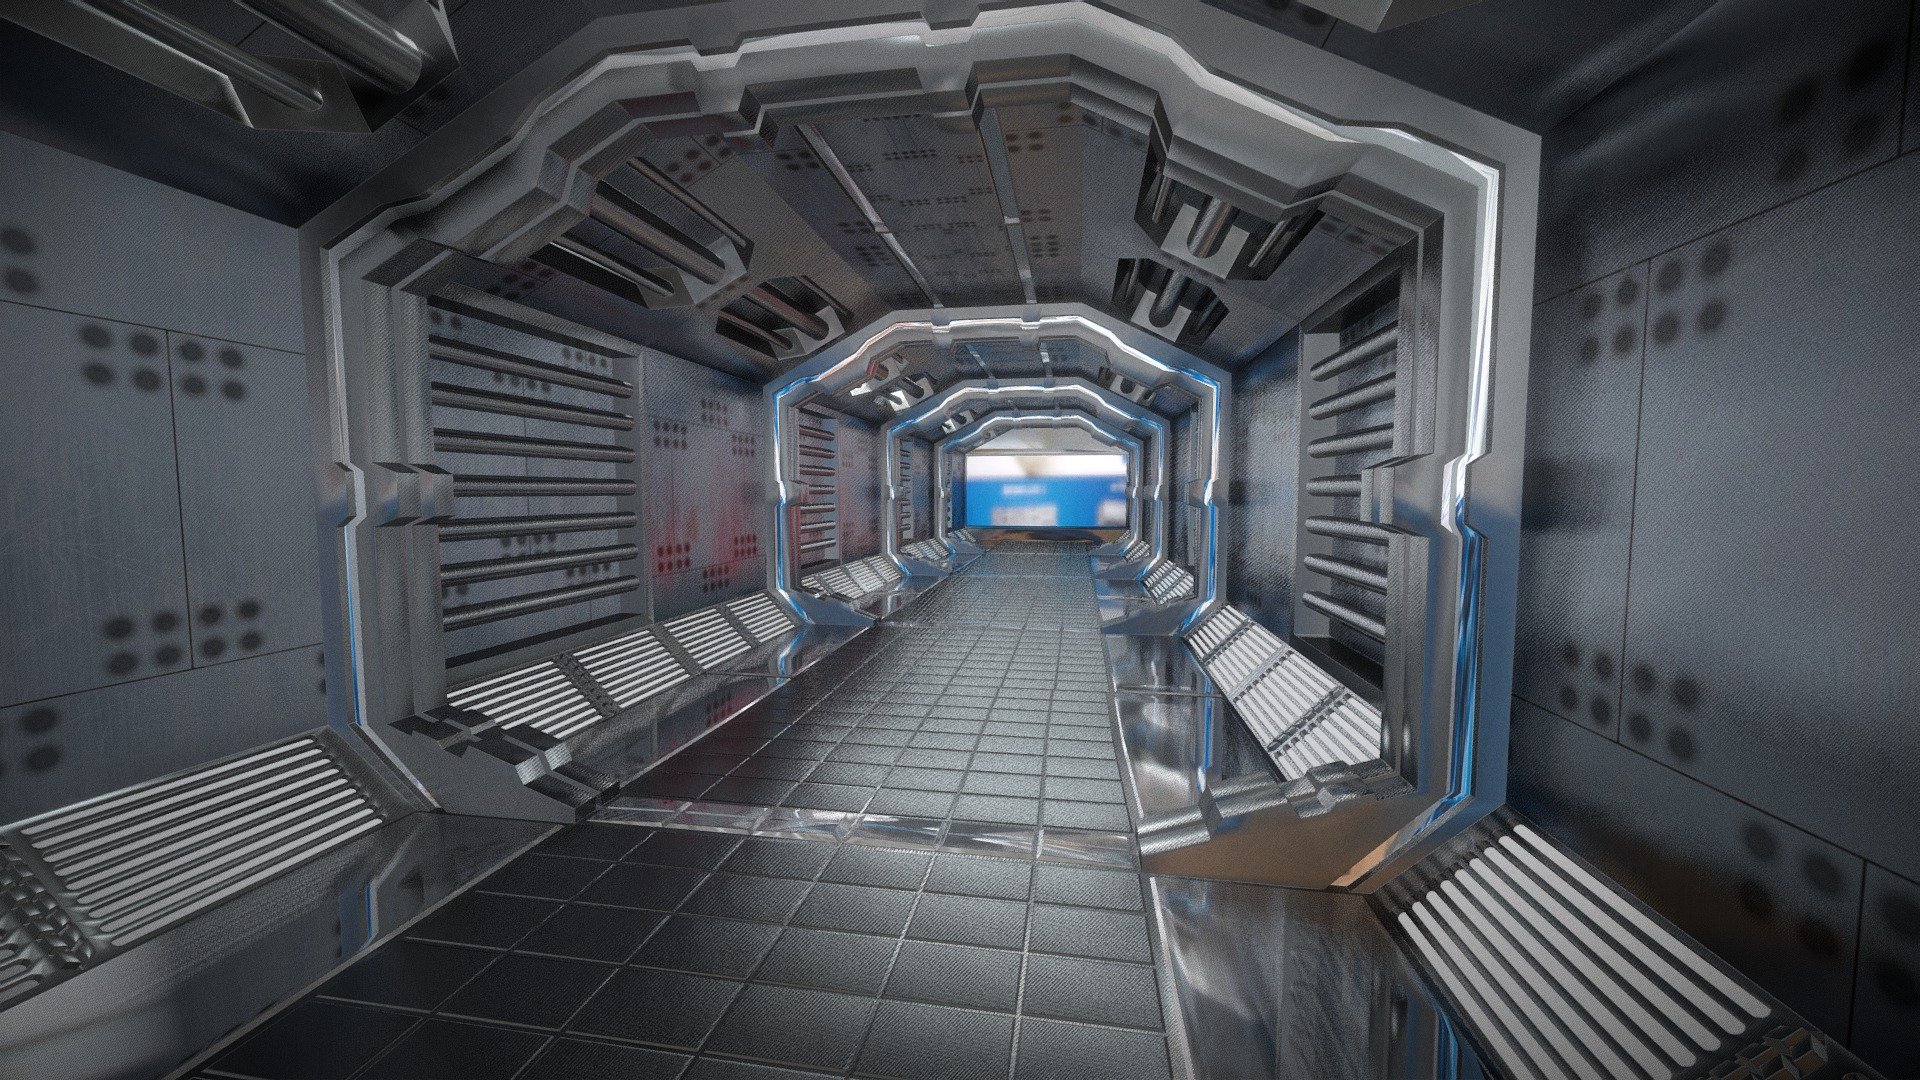 spaceship  corridor
made in blender totally 
you can use it in game just to have tweak some setting and some optimization - spaceship corridor/hallway - Download Free 3D model by zaki razzaque (@Zakirazzaque) 3d model